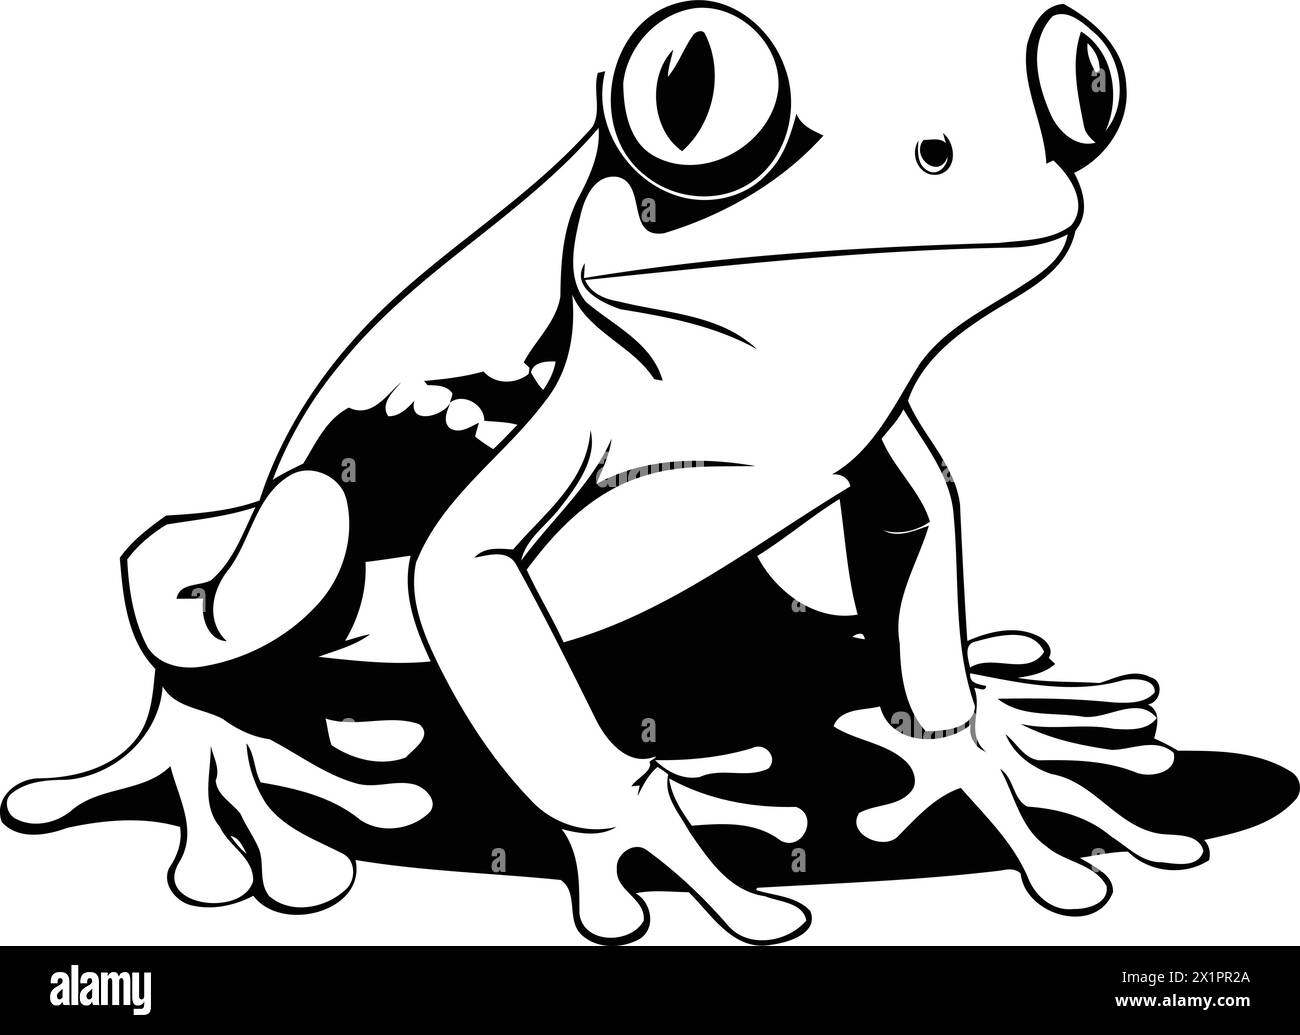 Frog cartoon character isolated on white background. Vector illustration. Eps 10. Stock Vector